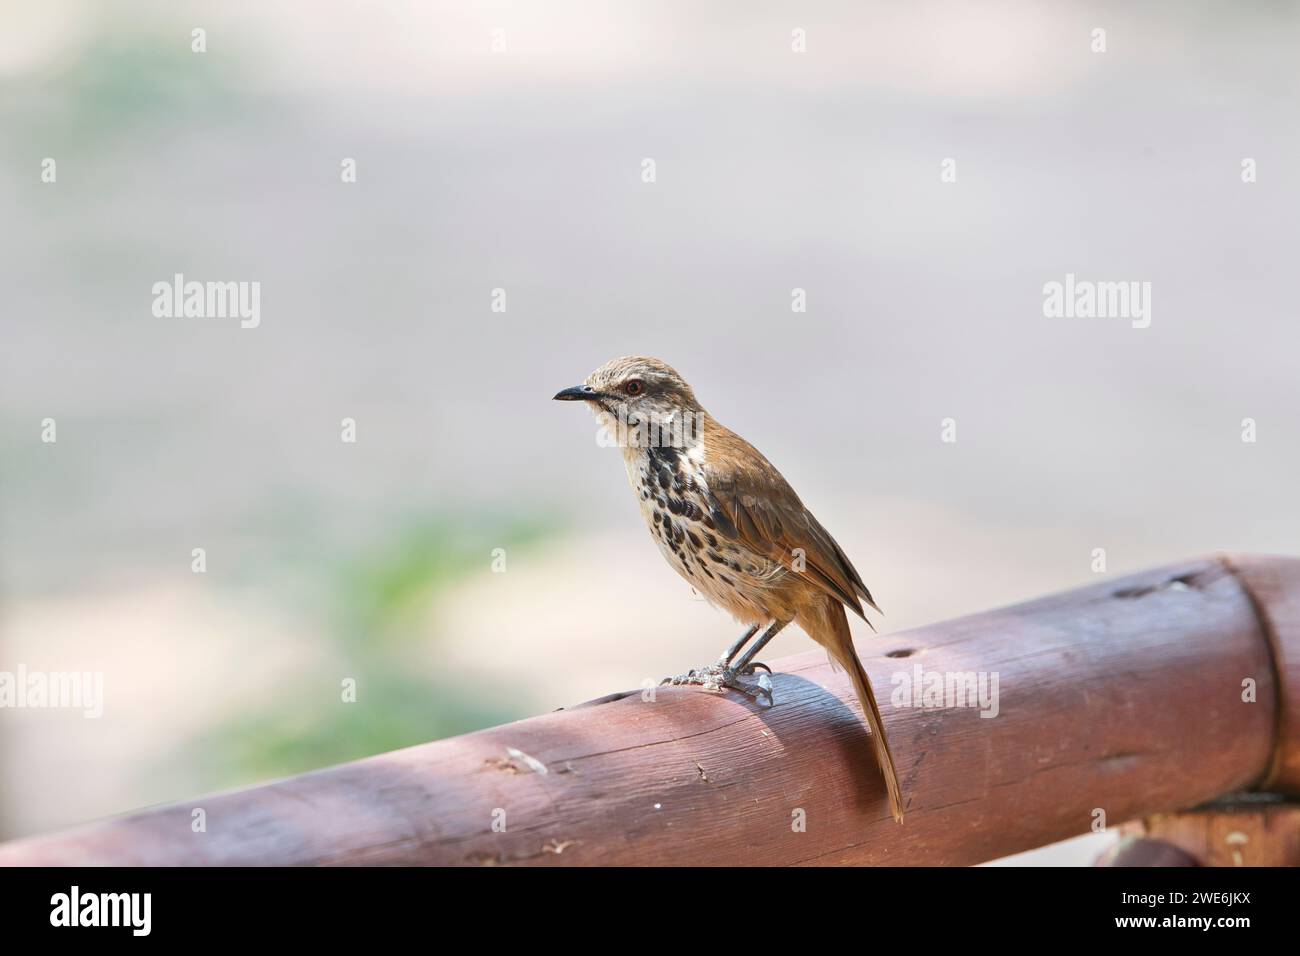 Spotted palm-thrush (Cichladusa guttata), also known as the spotted morning thrush, on a balcony Stock Photo